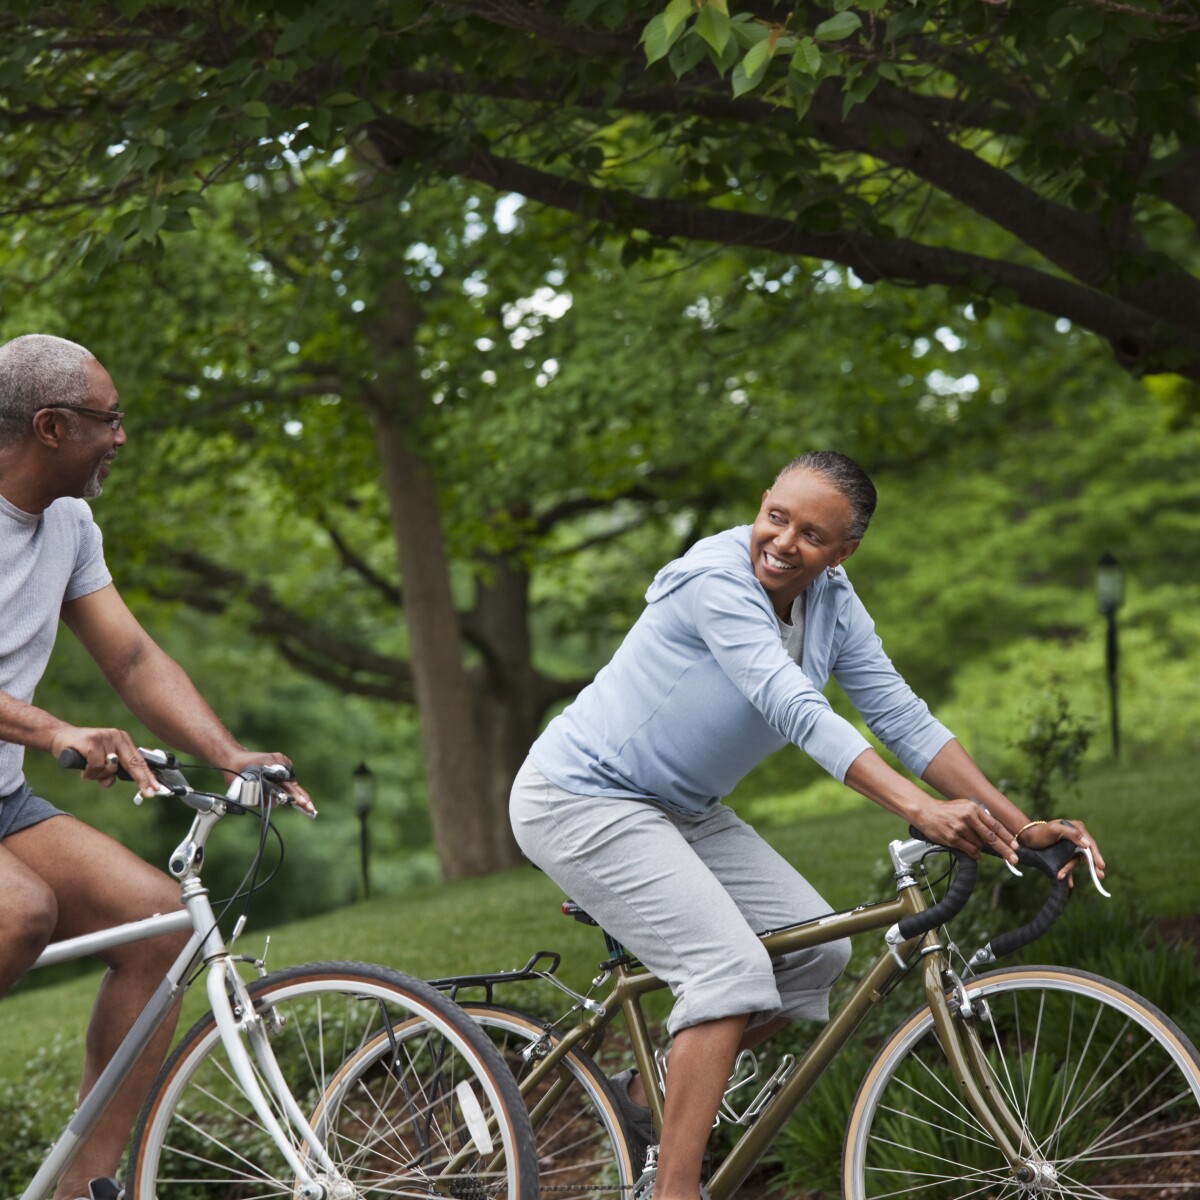 AARP Survey Finds Few Older Adults Get Enough Weekly Exercise